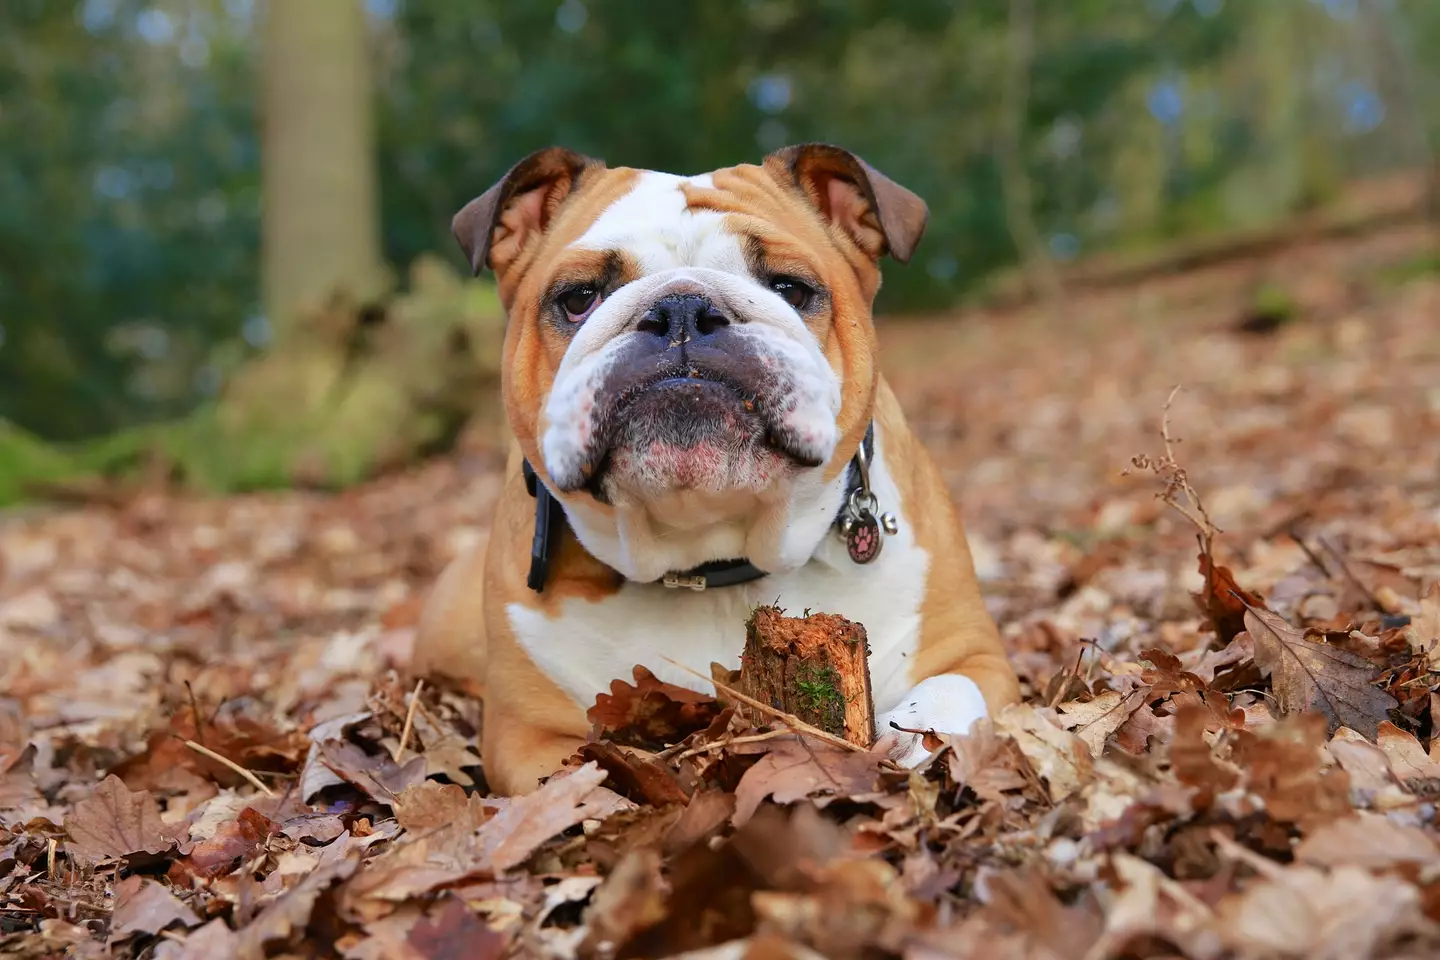 Flat-faced dogs are prone to breathing issues. (Getty stock image)